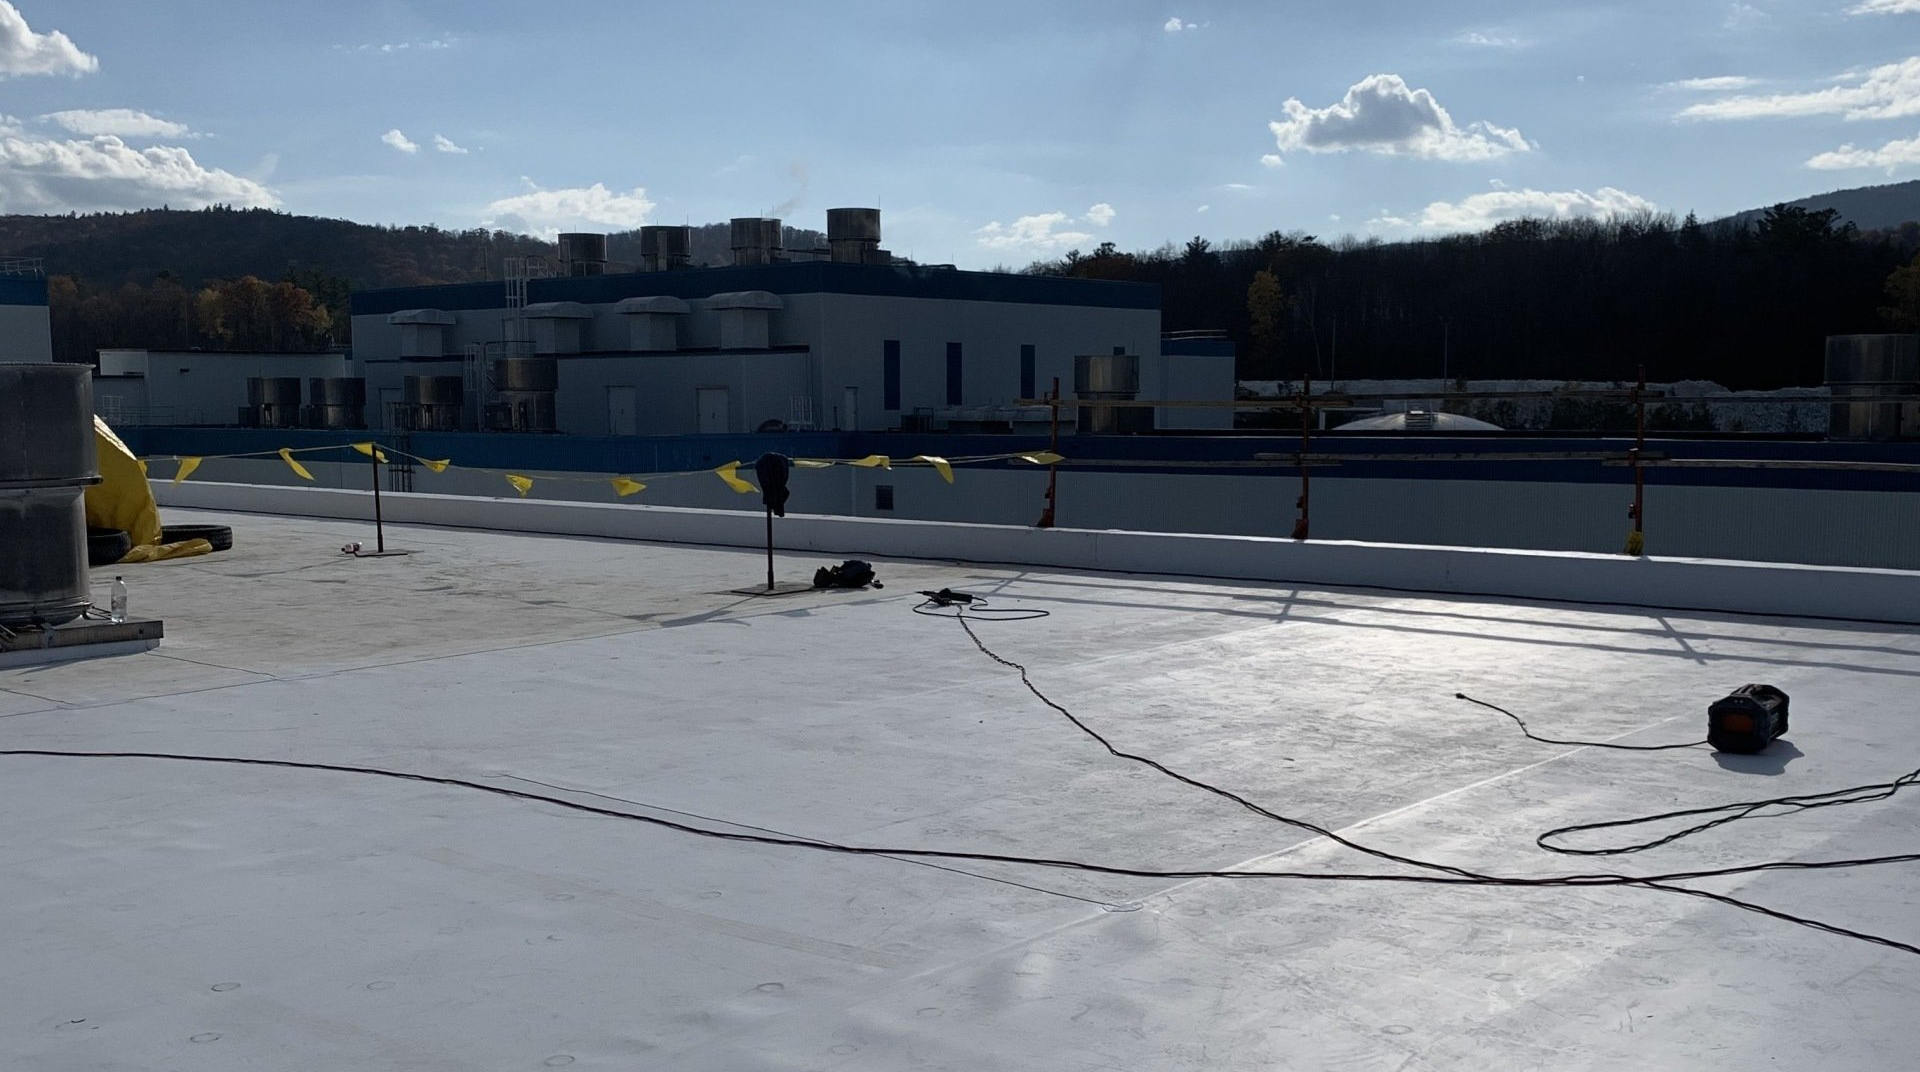 A flat commercial roof maintained by Rodd Roofing in northern Vermont